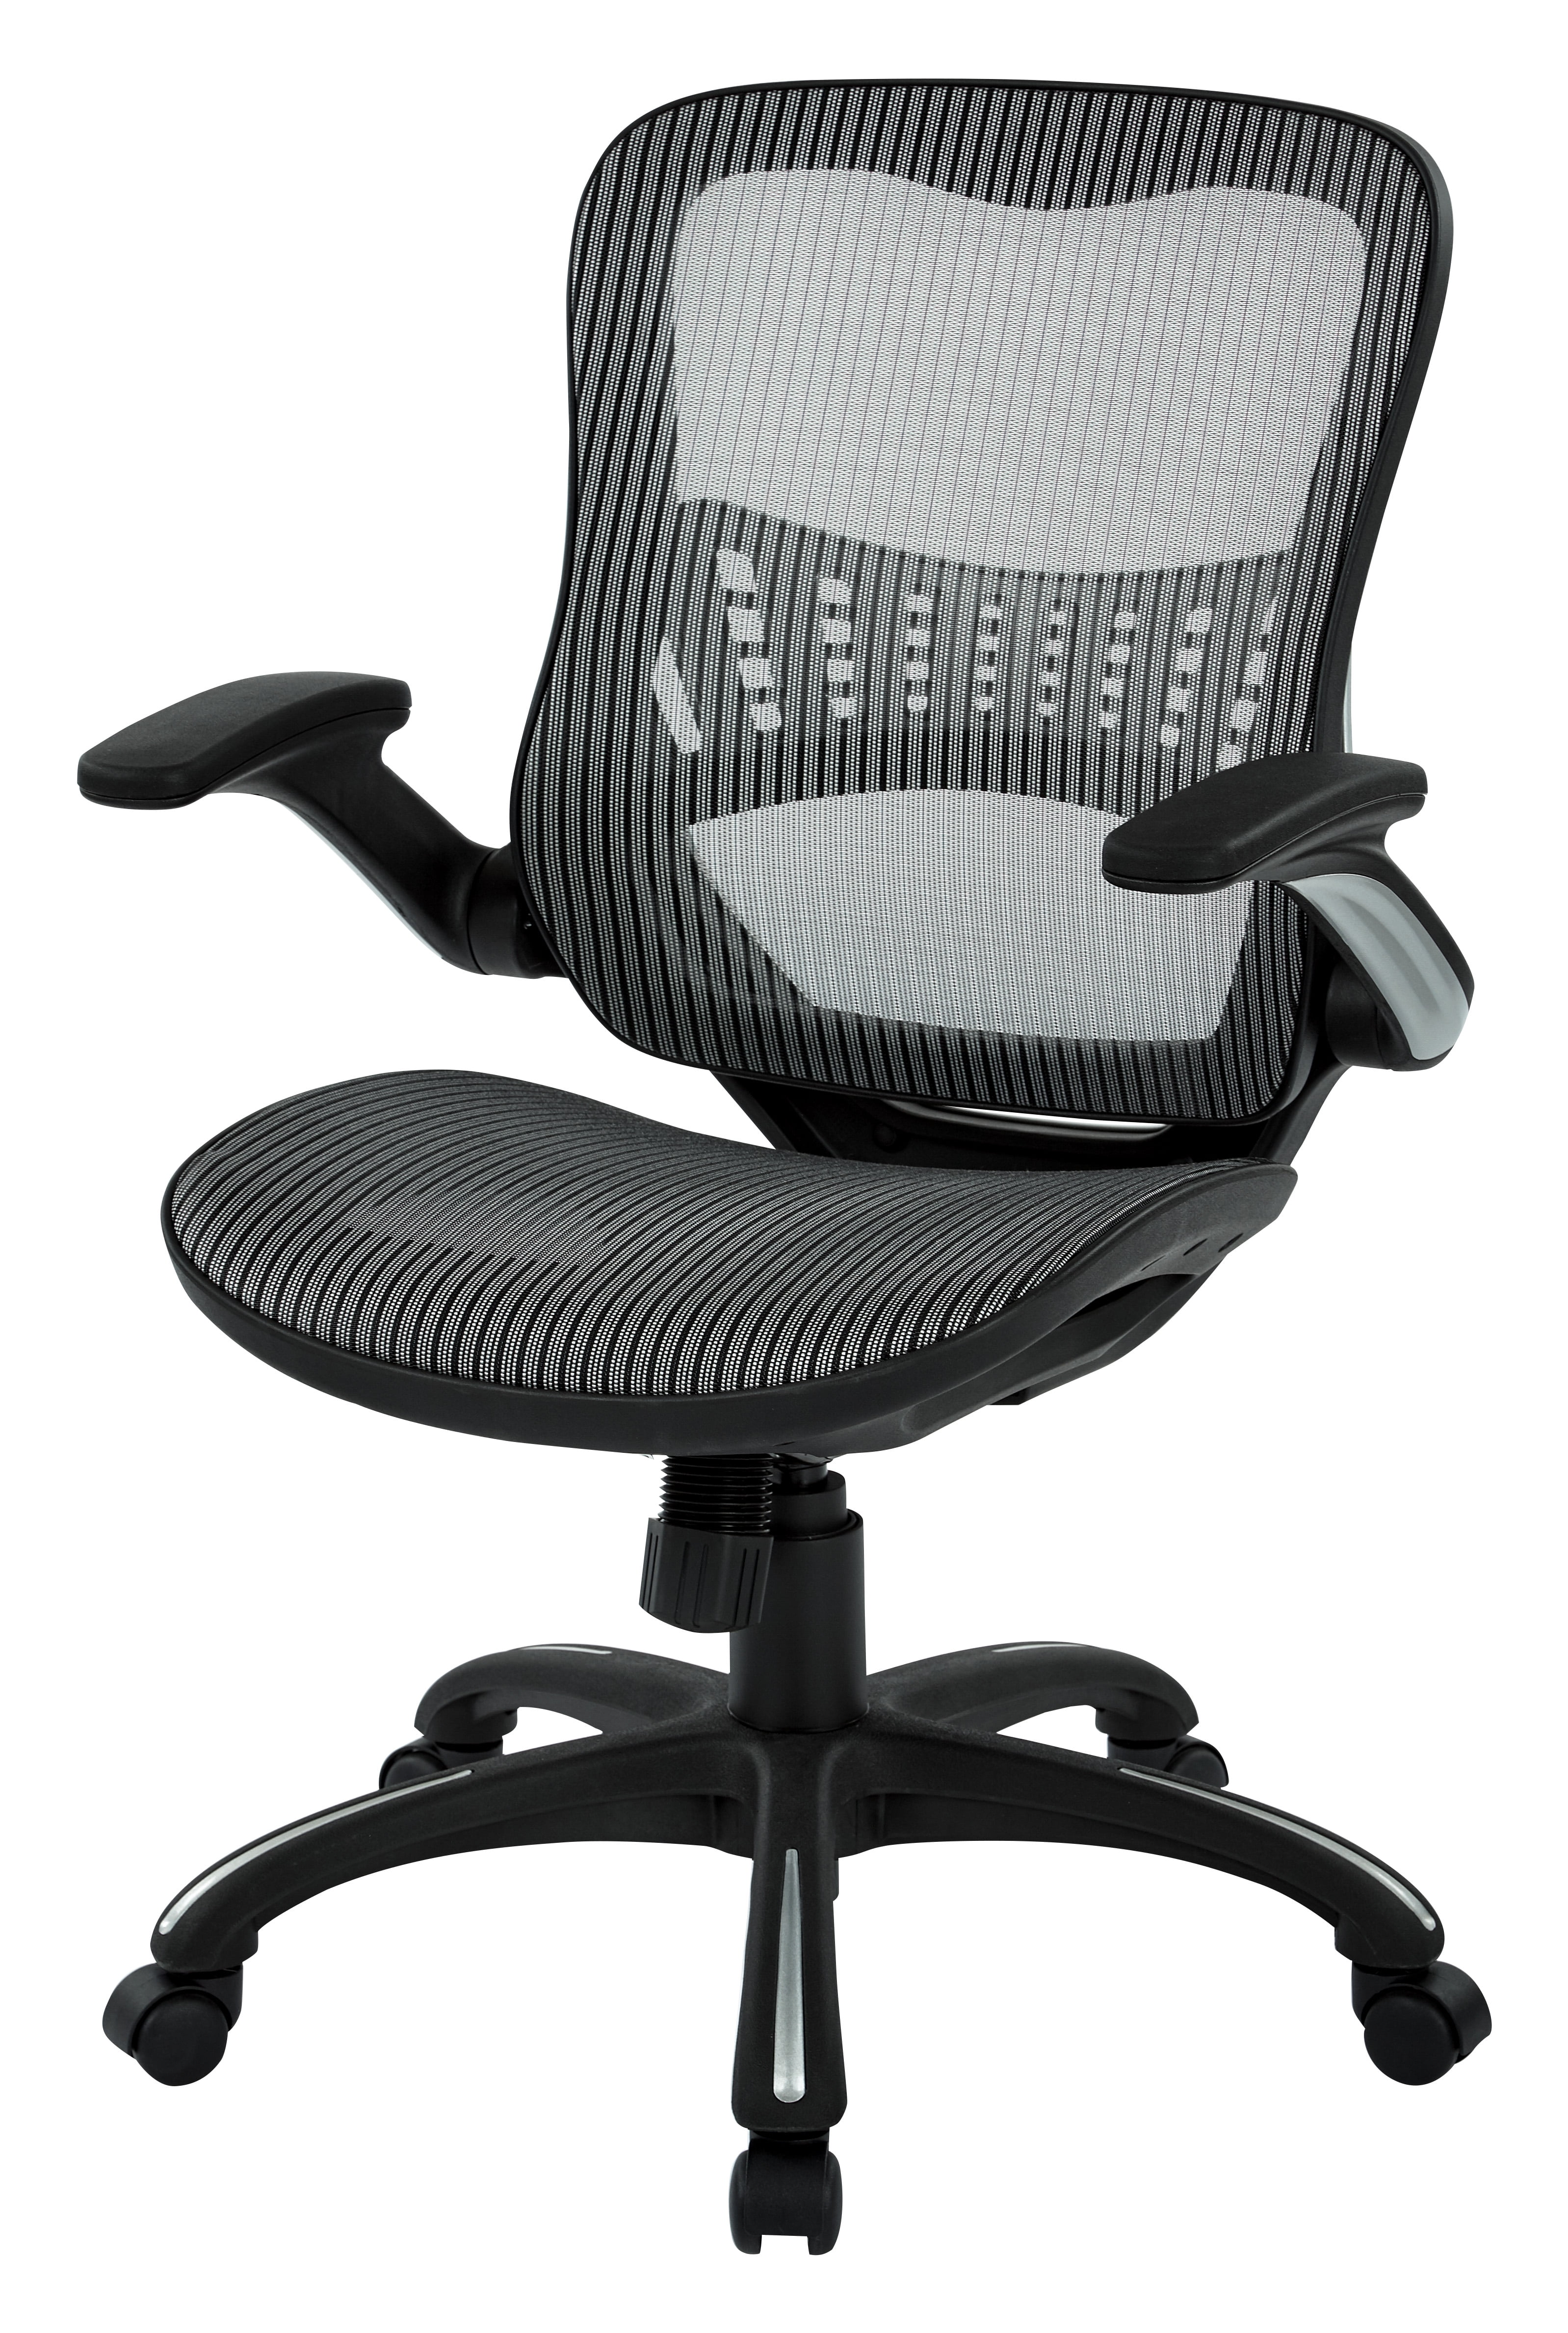 Office Star EM60926P3M Screen Back Manager Chair with Mesh Seat -  Black/Silver, 1 - Harris Teeter